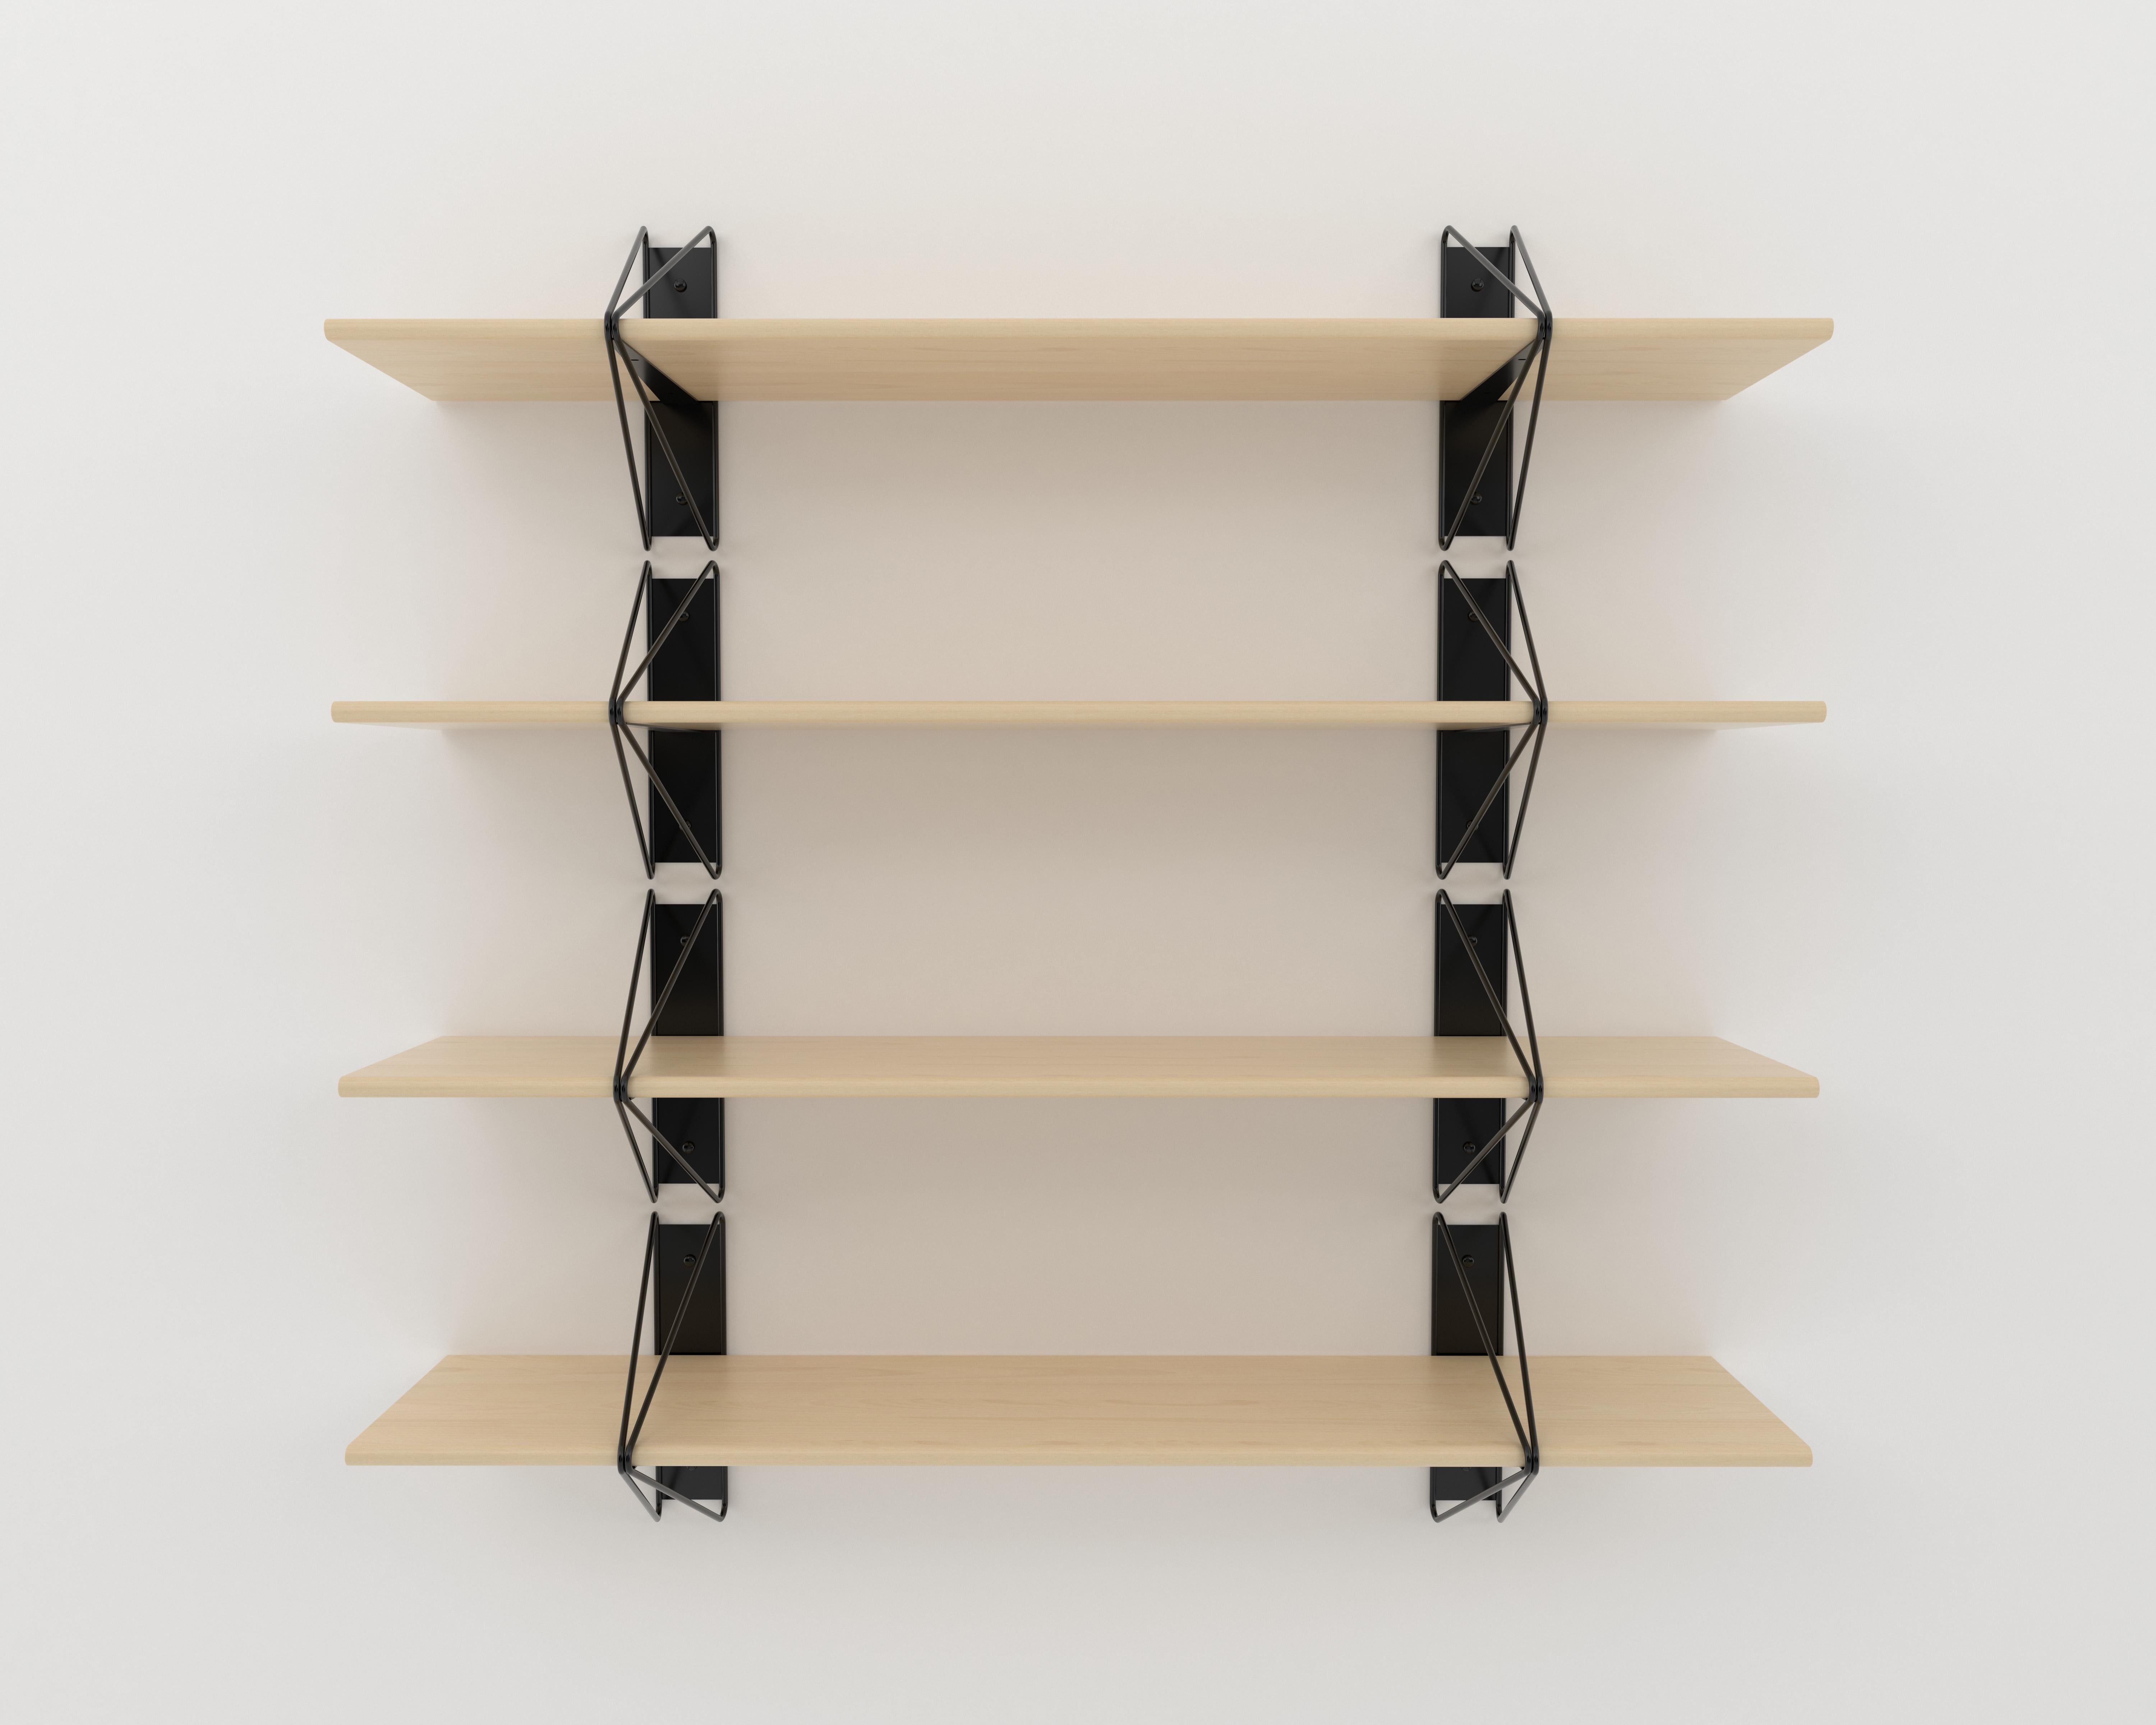 Powder-Coated Set of 4 Strut Shelves from Souda, White and Maple, Made to Order For Sale